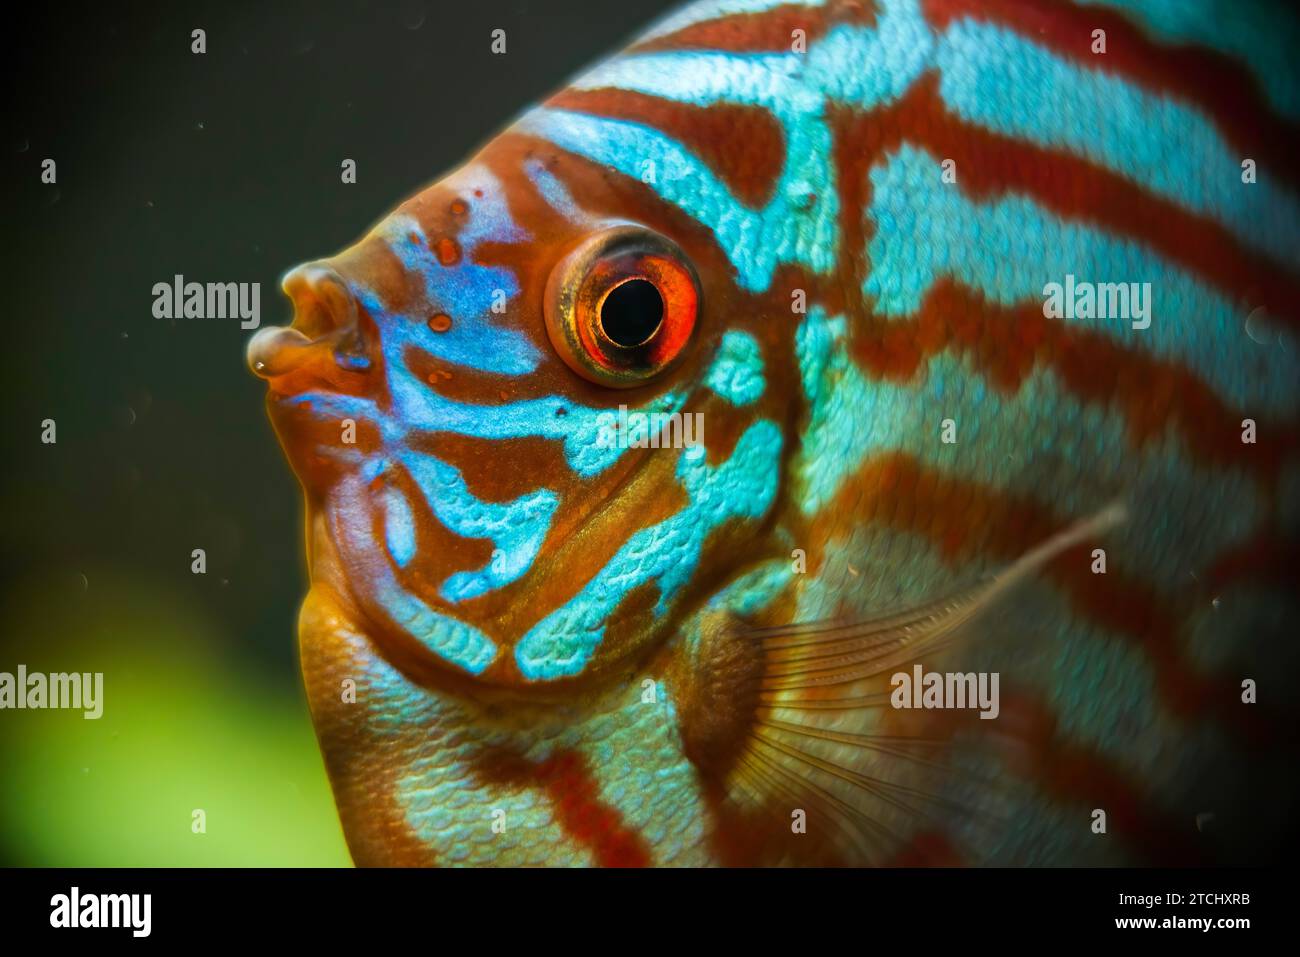 Red, blue, green Discus fish detailed close up in the aquarium. Fishkeeping theme Stock Photo